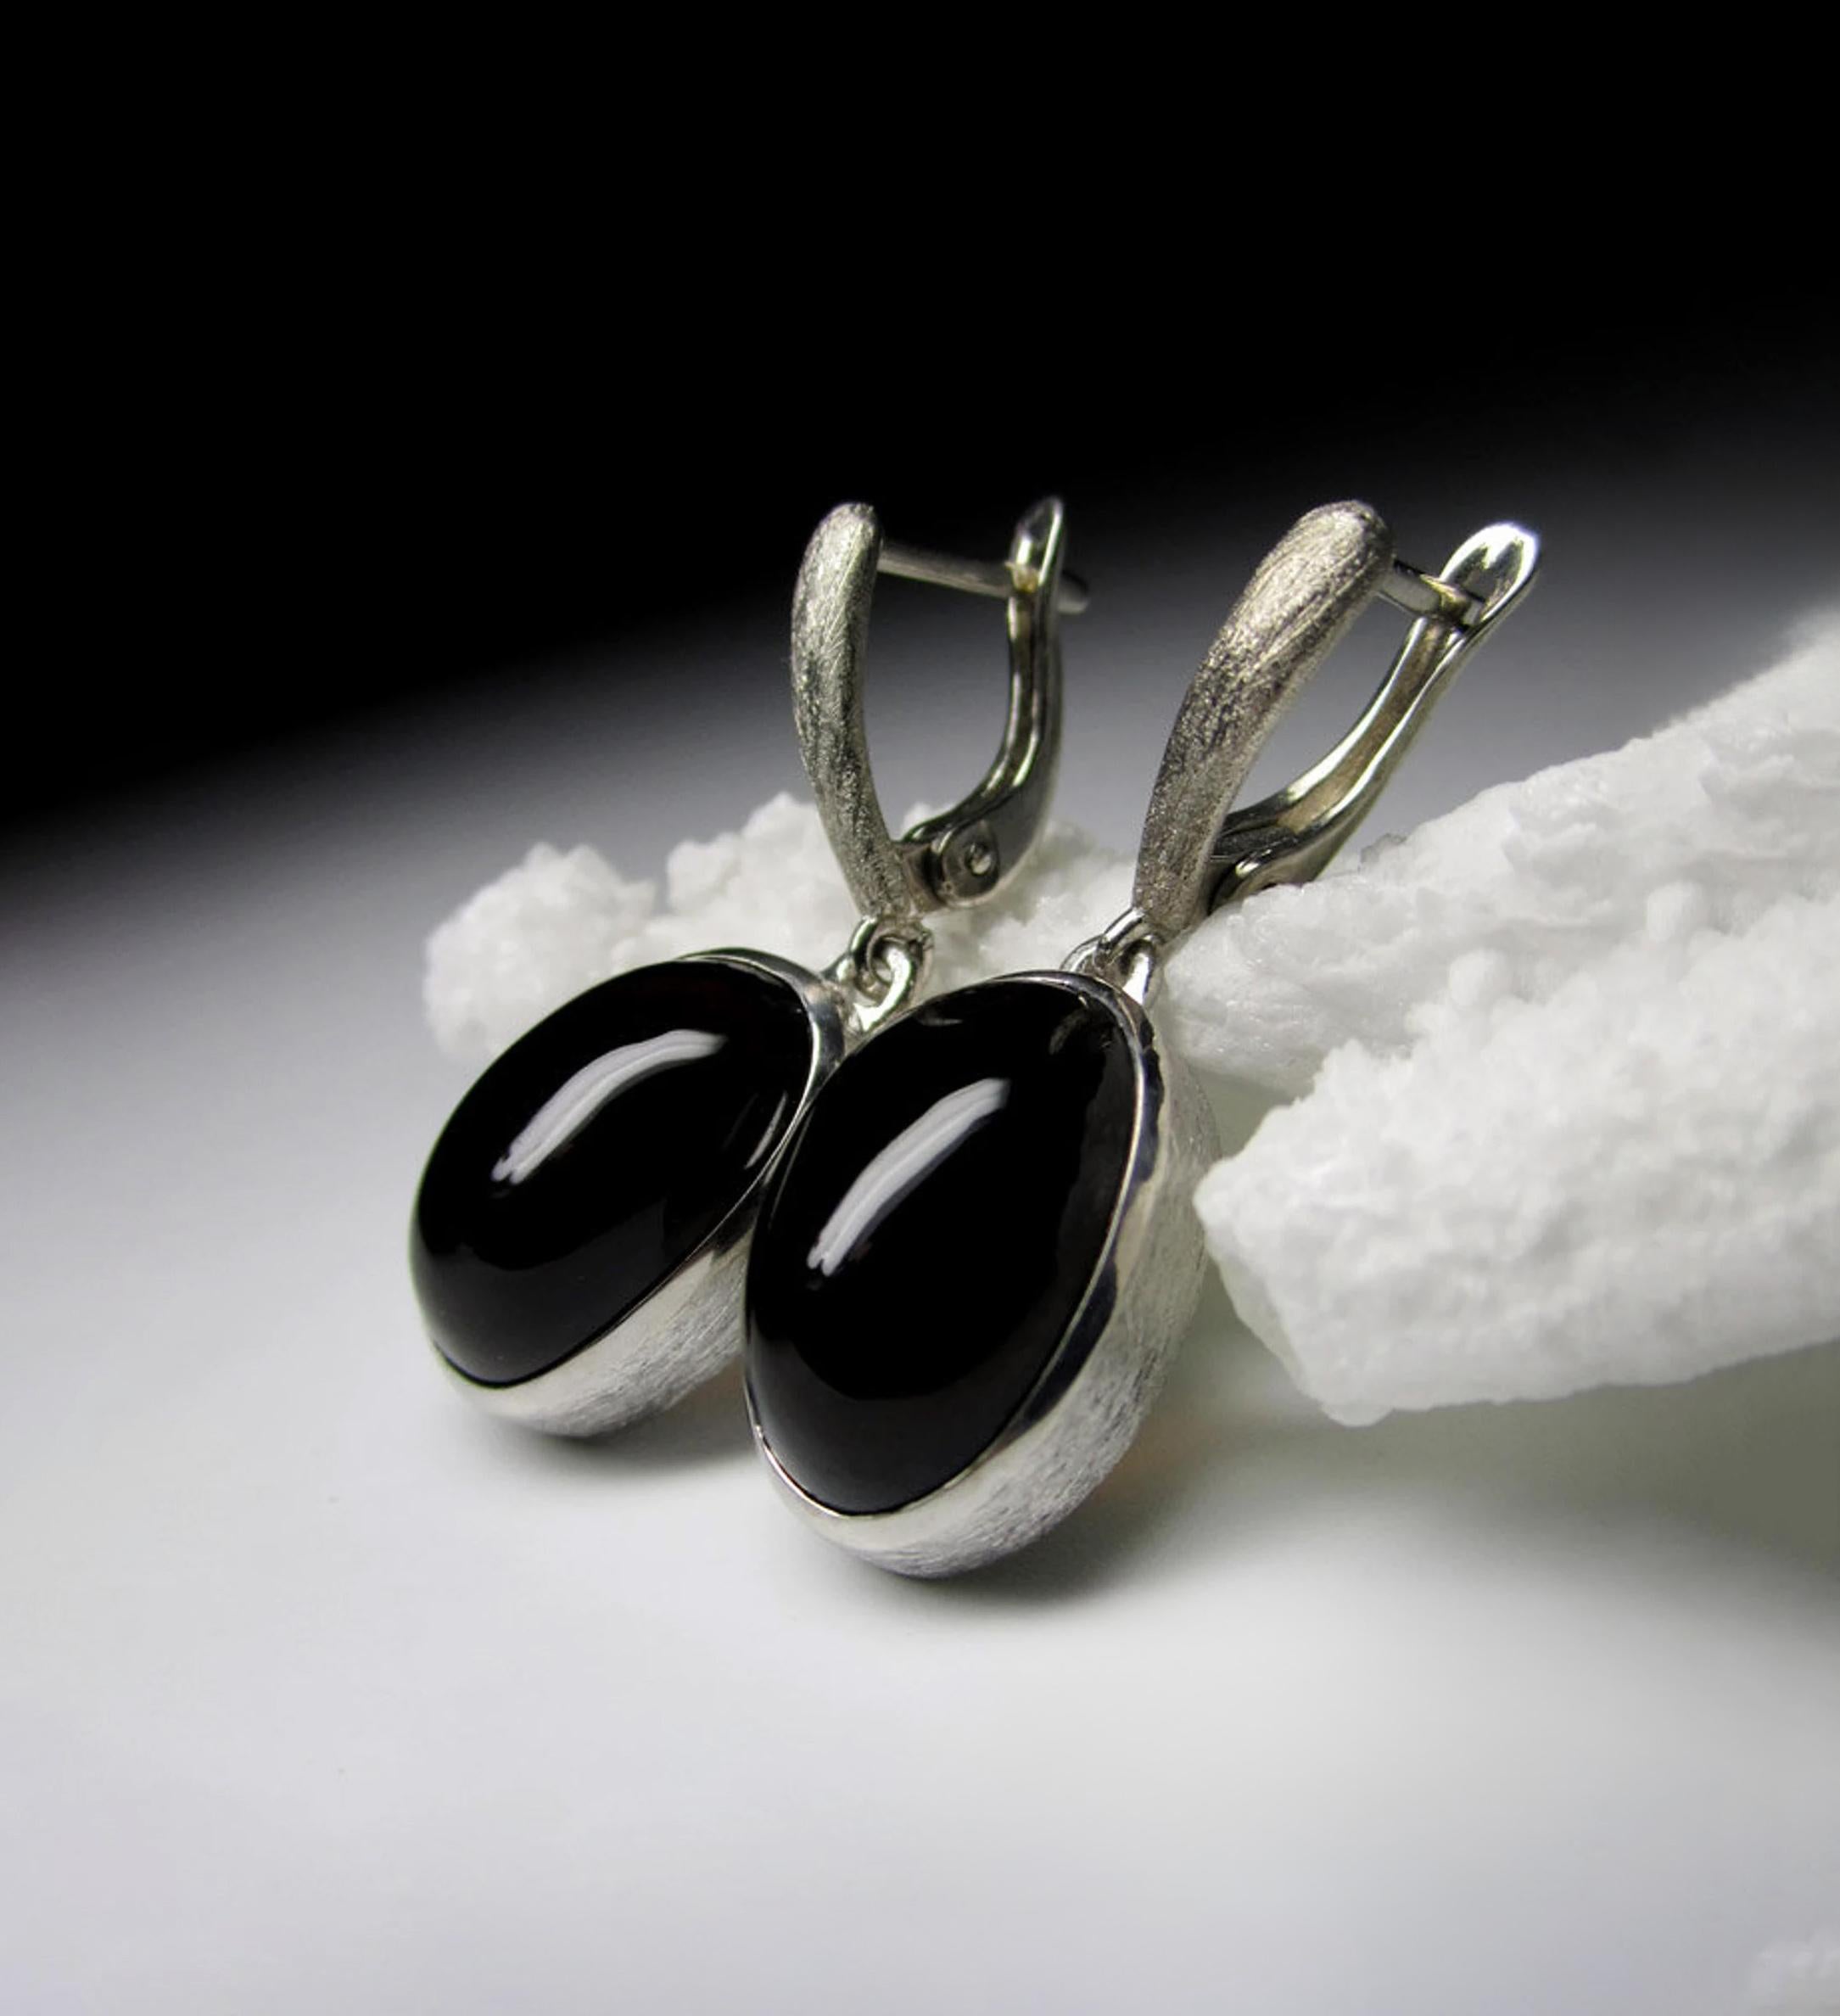 Scratched silver earrings with natural Morion black Quartz
stone measurements - 0.35 х 0.39 х 0.59 in / 9 х 10 х 15 mm
stone weight - 25 carats
earrings weight - 9.81 grams
earrings height - 1.3 in / 33 mm